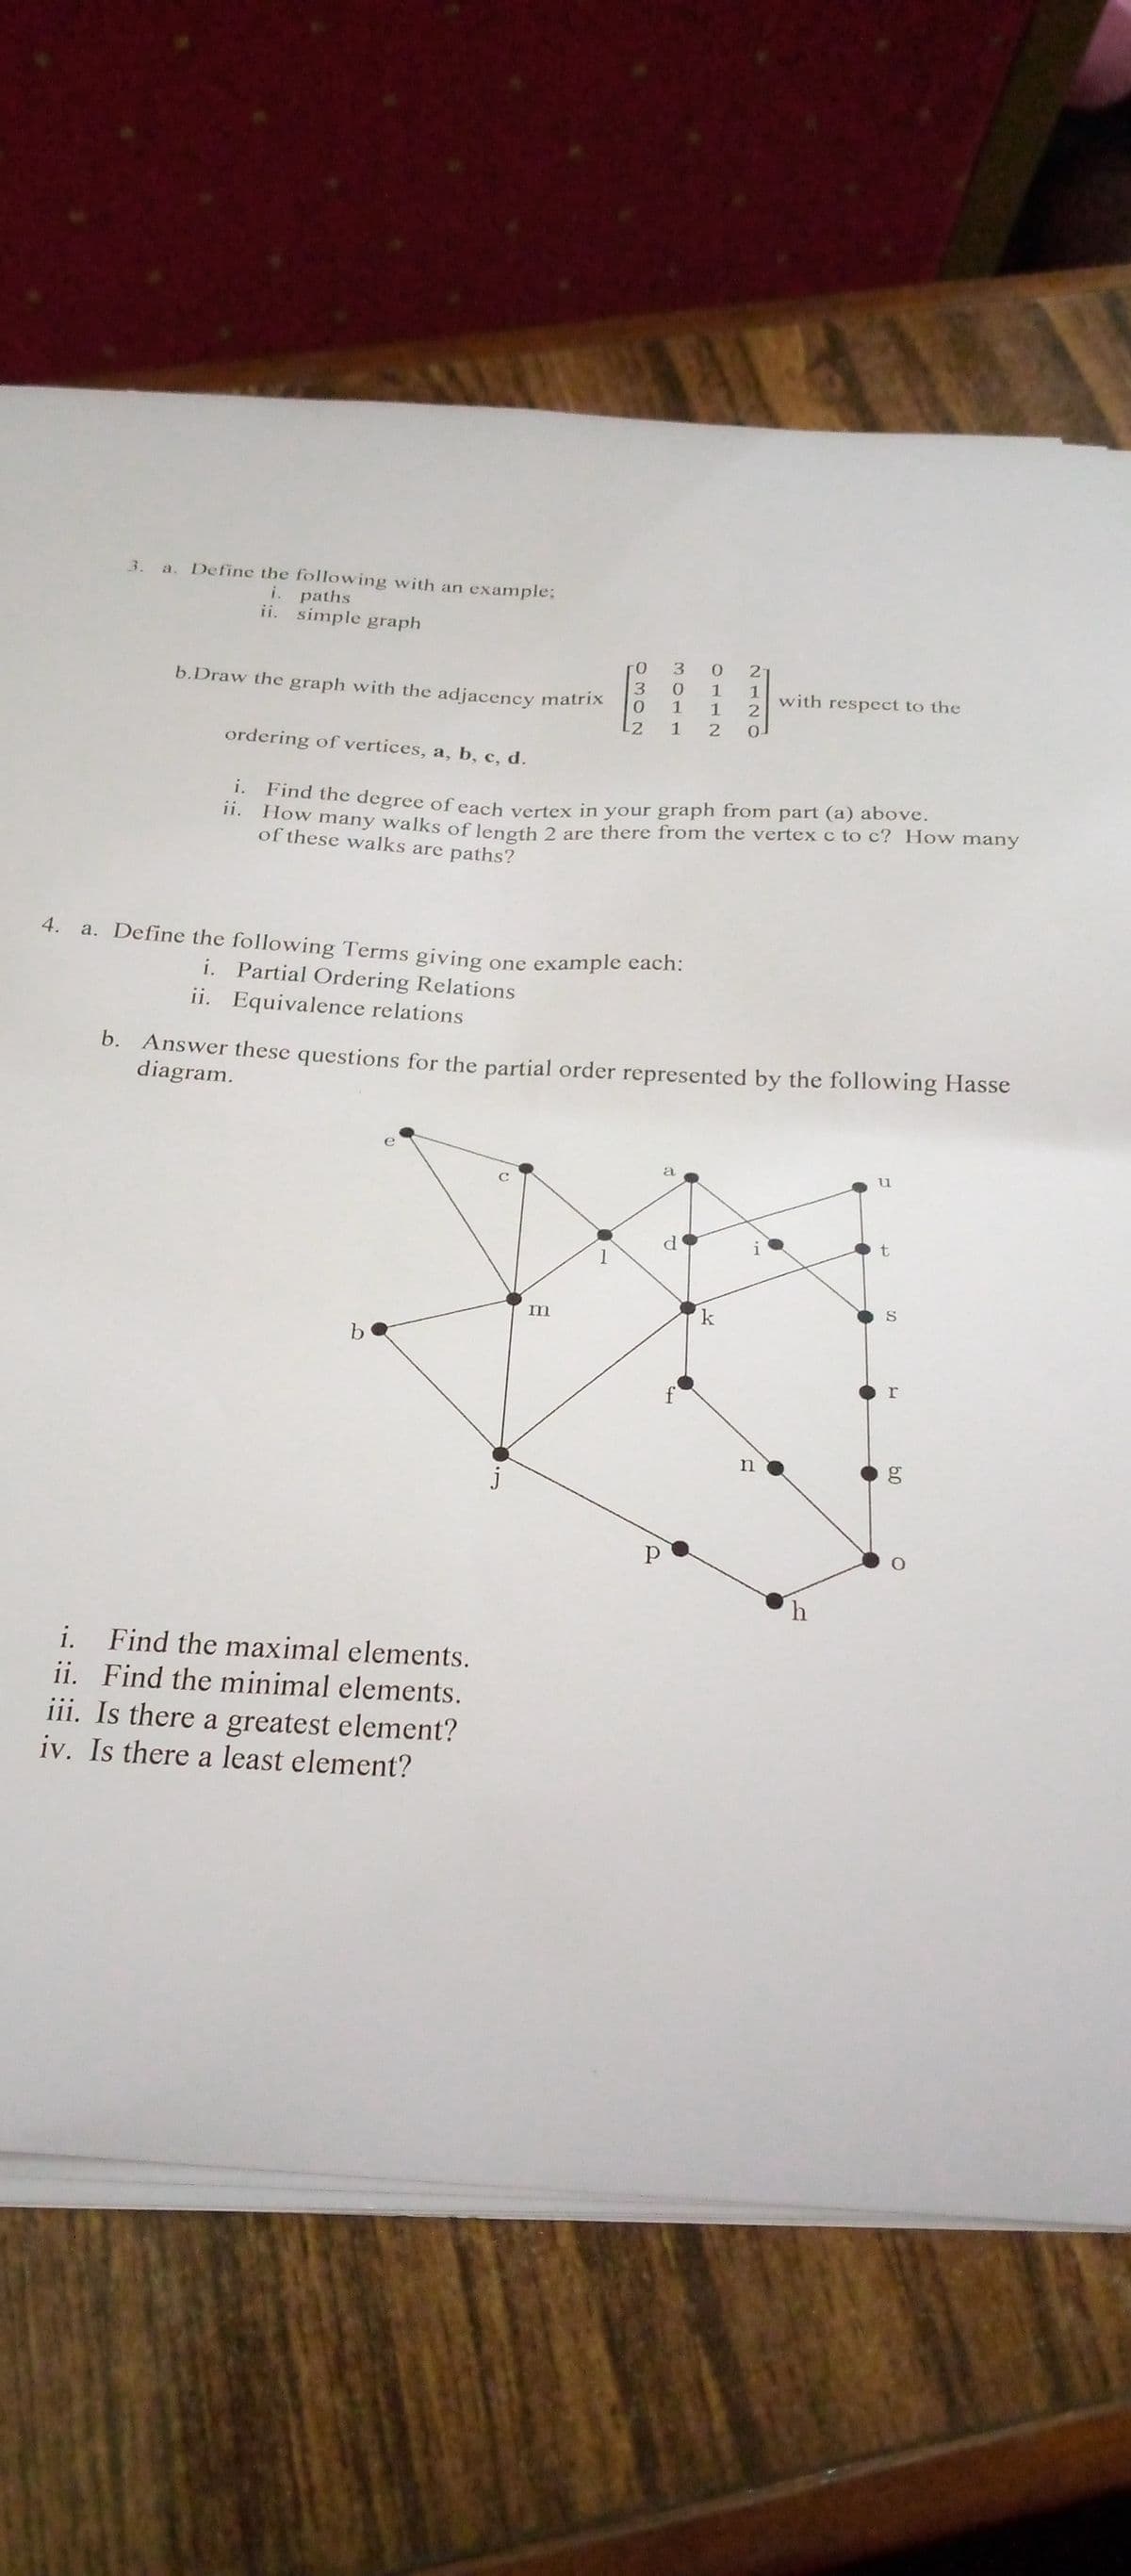 a. Define the following with an example:
i. paths
ii. simple graph
3.
21
b.Draw the graph with the adjacency matrix
1
with respect to the
2.
0.
-2
ordering of vertices, a, b, c, d.
: Find the degree of each vertex in your graph from part (a) above.
1. How many walks of length 2 are there from the vertex c to c? How many
of these walks are paths?
4.
a. Define the following Terms giving
one example each:
i. Partial Ordering Relations
ii. Equivalence relations
b. Answer these questions for the partial order represented by the following Hasse
diagram.
a
u
d'
m
k
h
i. Find the maximal elements.
ii. Find the minimal elements.
iii. Is there a greatest element?
iv. Is there a least element?
60
2110O
3011
